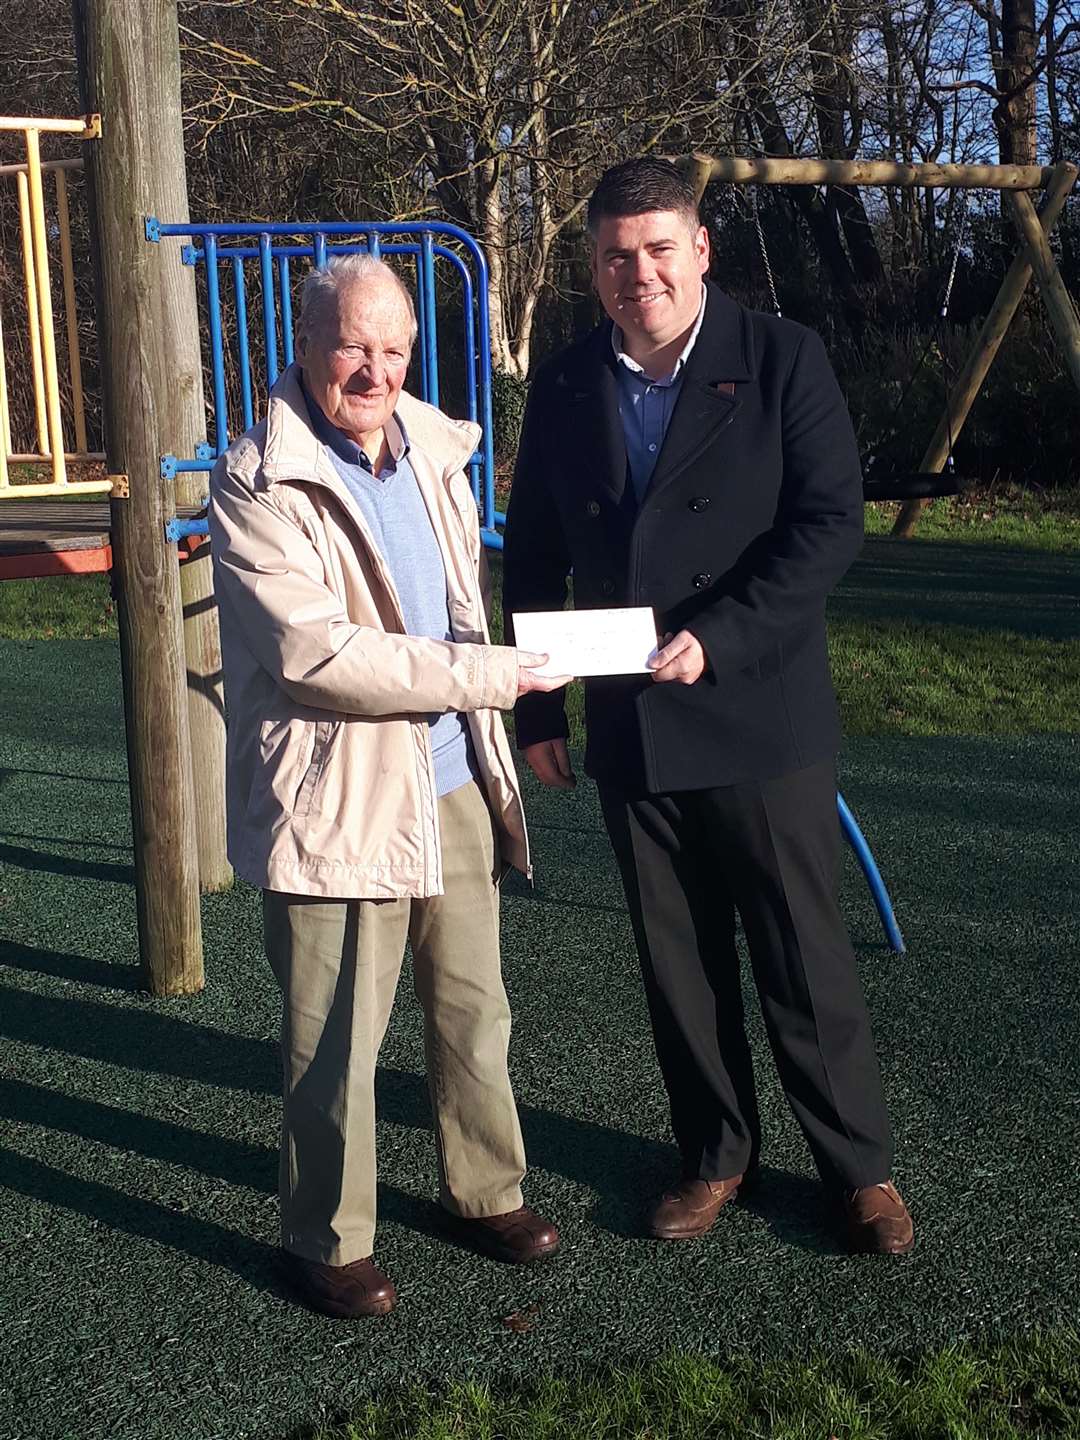 Gary Thomas accepting a donation from Dave Byford of the Kent County Playing Fields Association towards the village play area